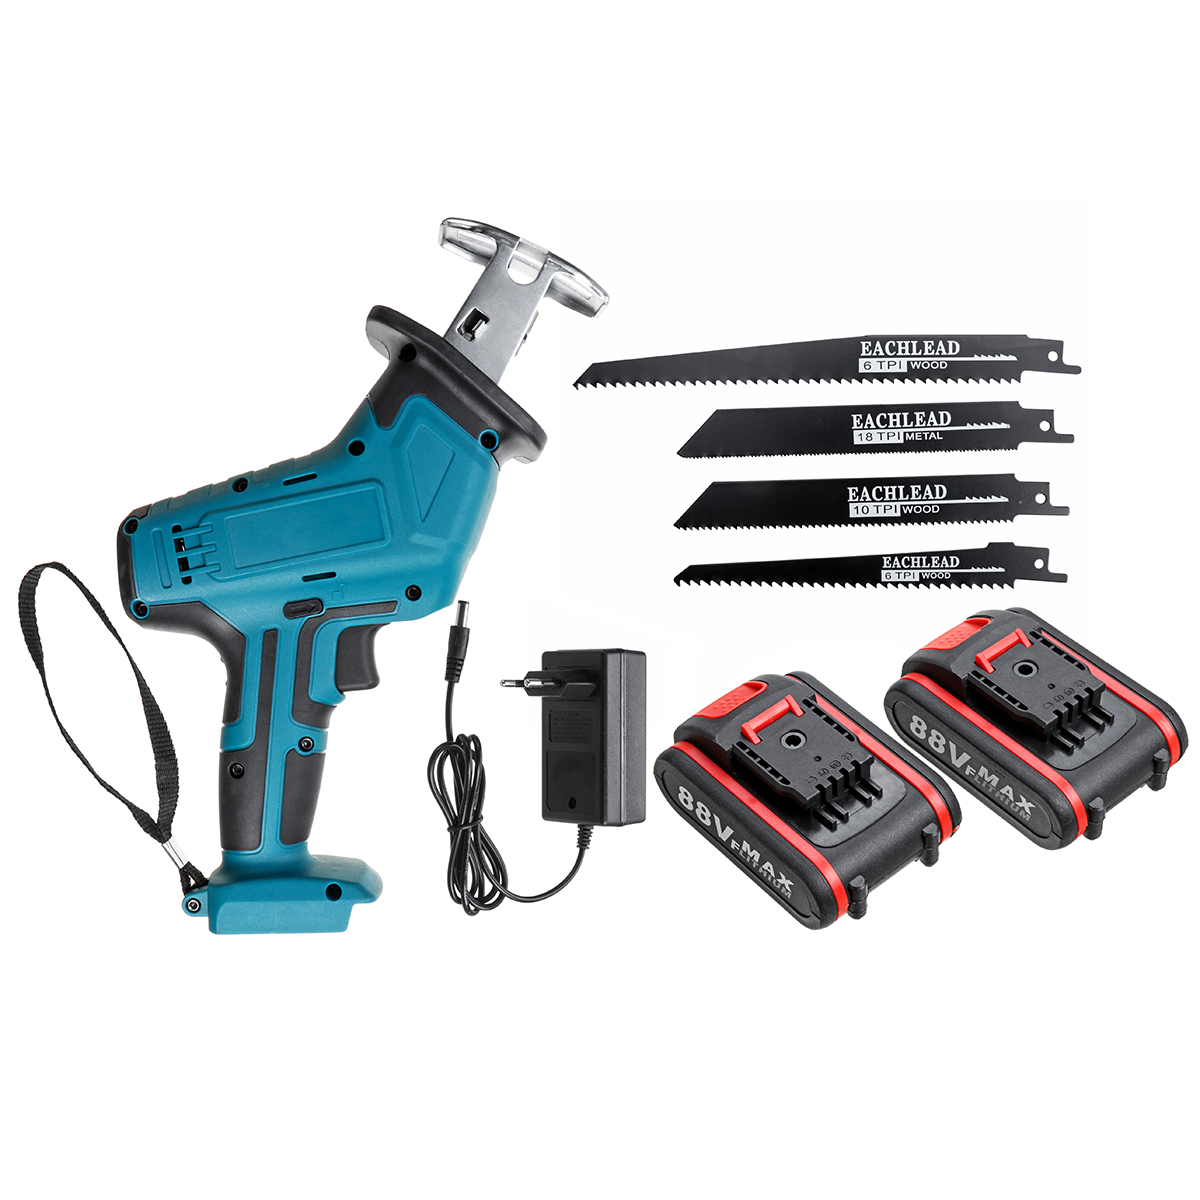 110-220V-Electric-Cordless-Saber-Saw-2-Batteries-With-1-Charger-Reciprocating-Saw-Body-Only-Cutting--1733497-8